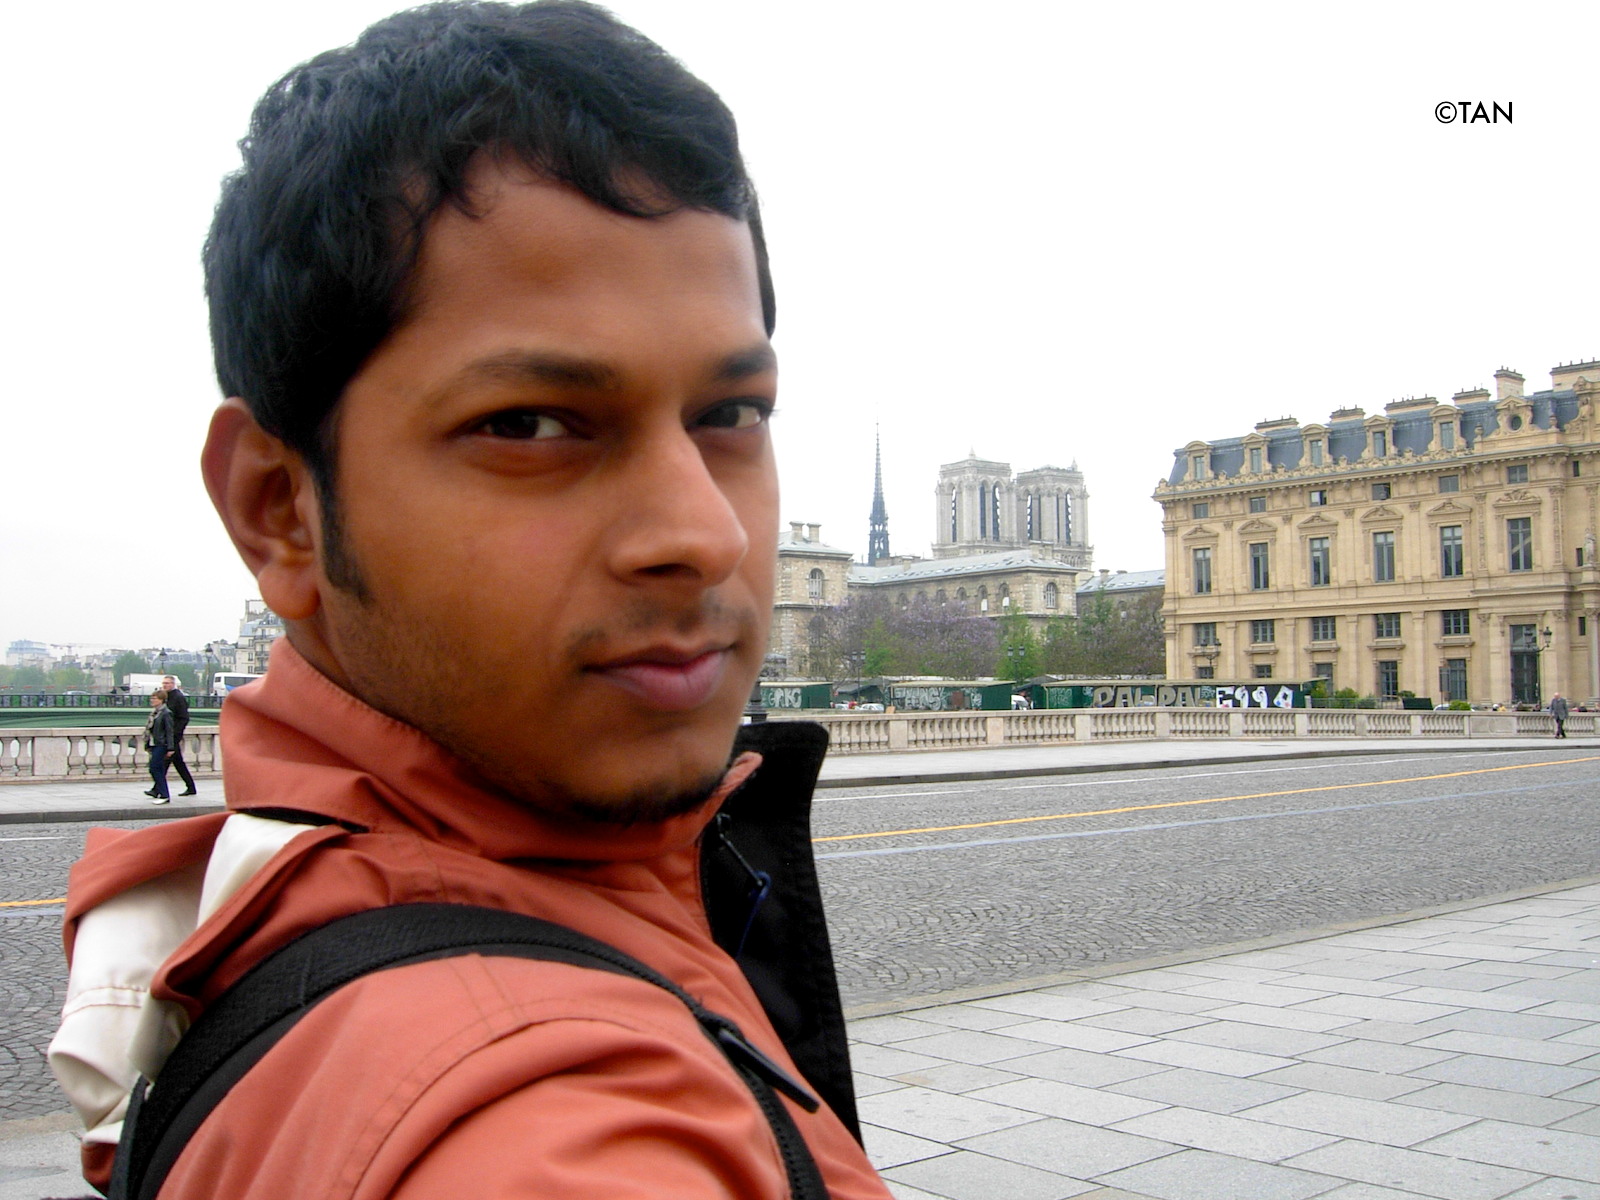 Selfie with the Notre-Dame cathedral in Paris